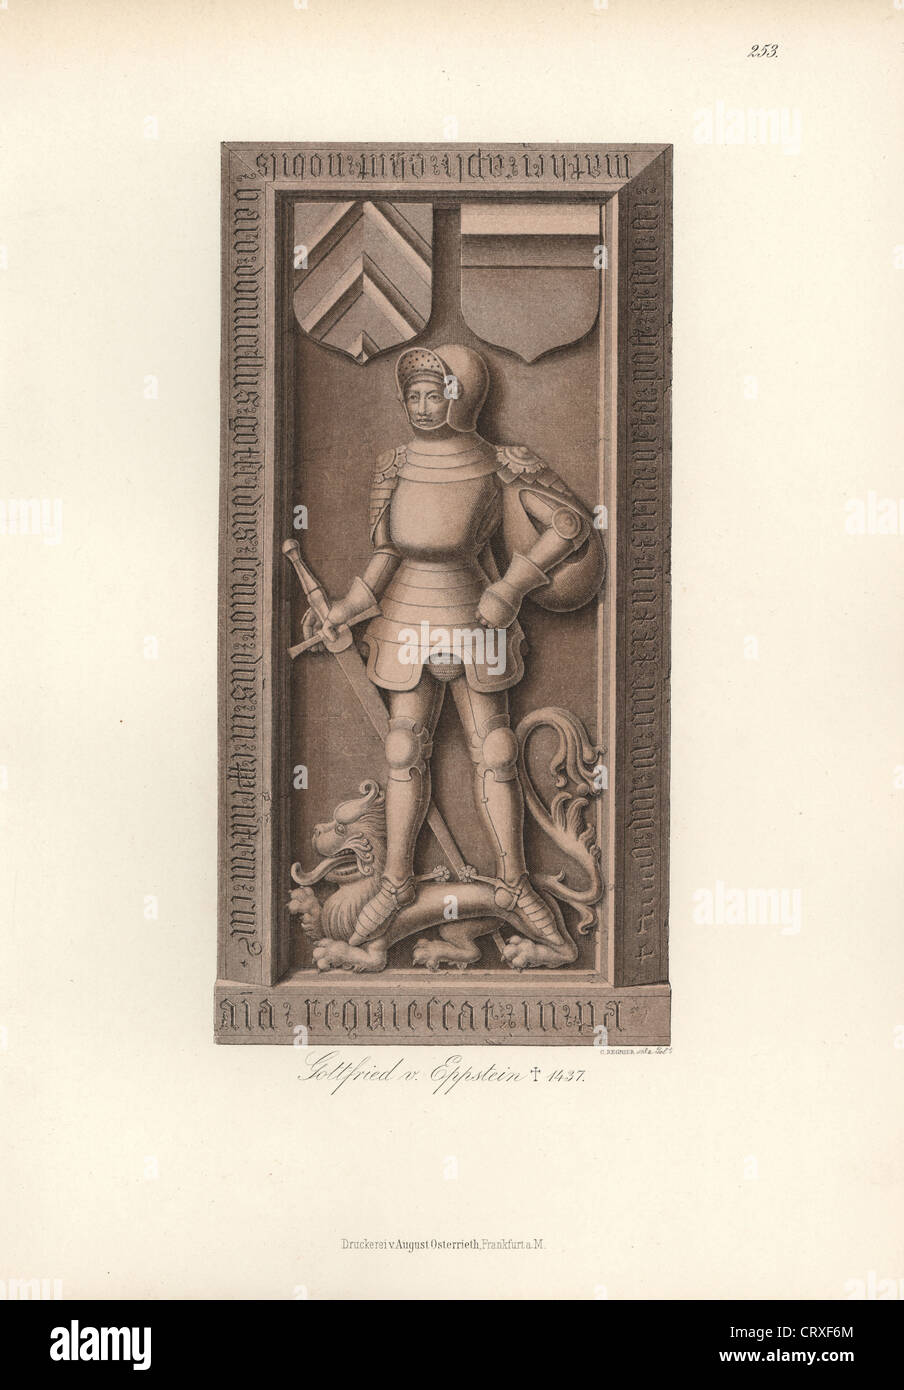 Knight in armour from the 15th century with heraldic shield and helmet. Gravestone of Gottfried von Eppstein, died 1437. Stock Photo